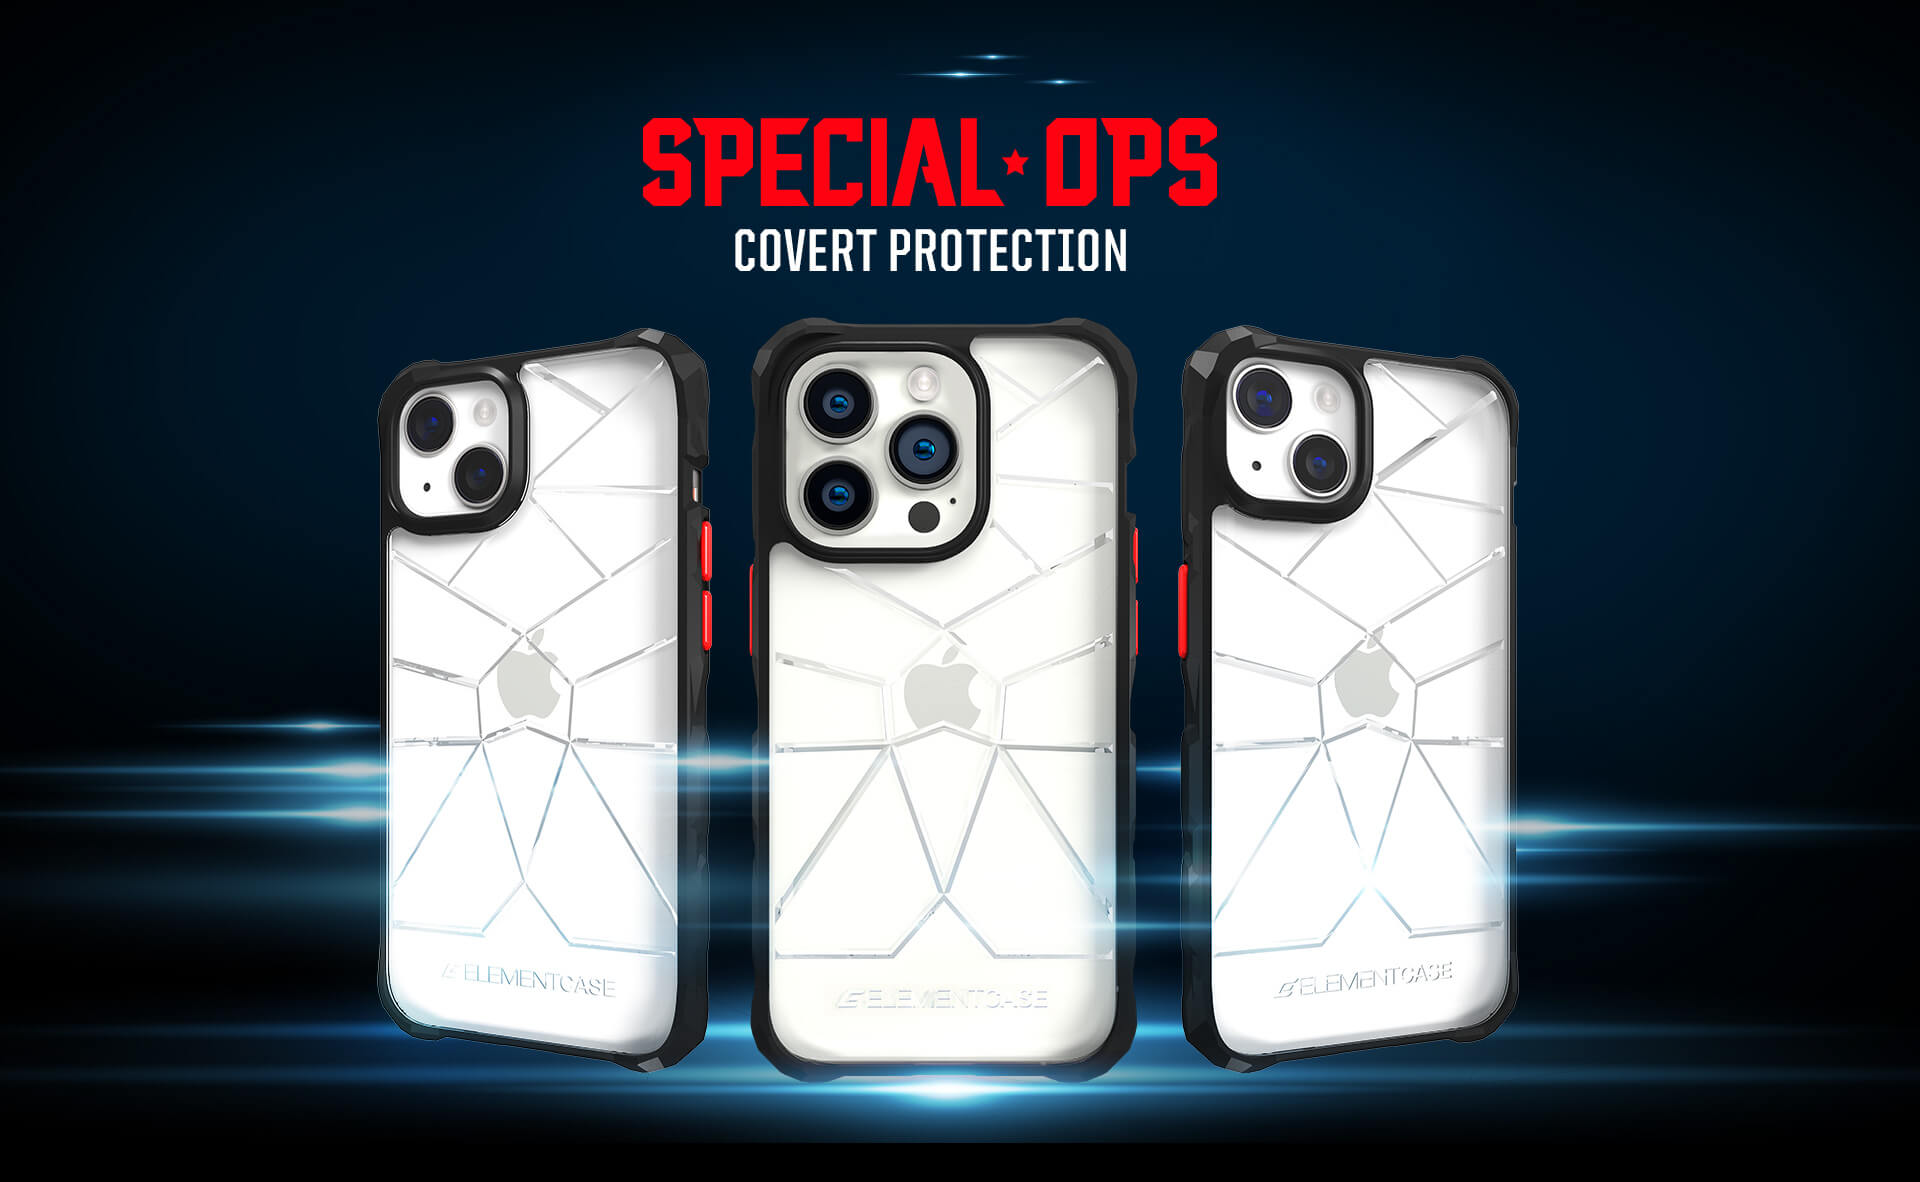 Special Ops Covert Protection